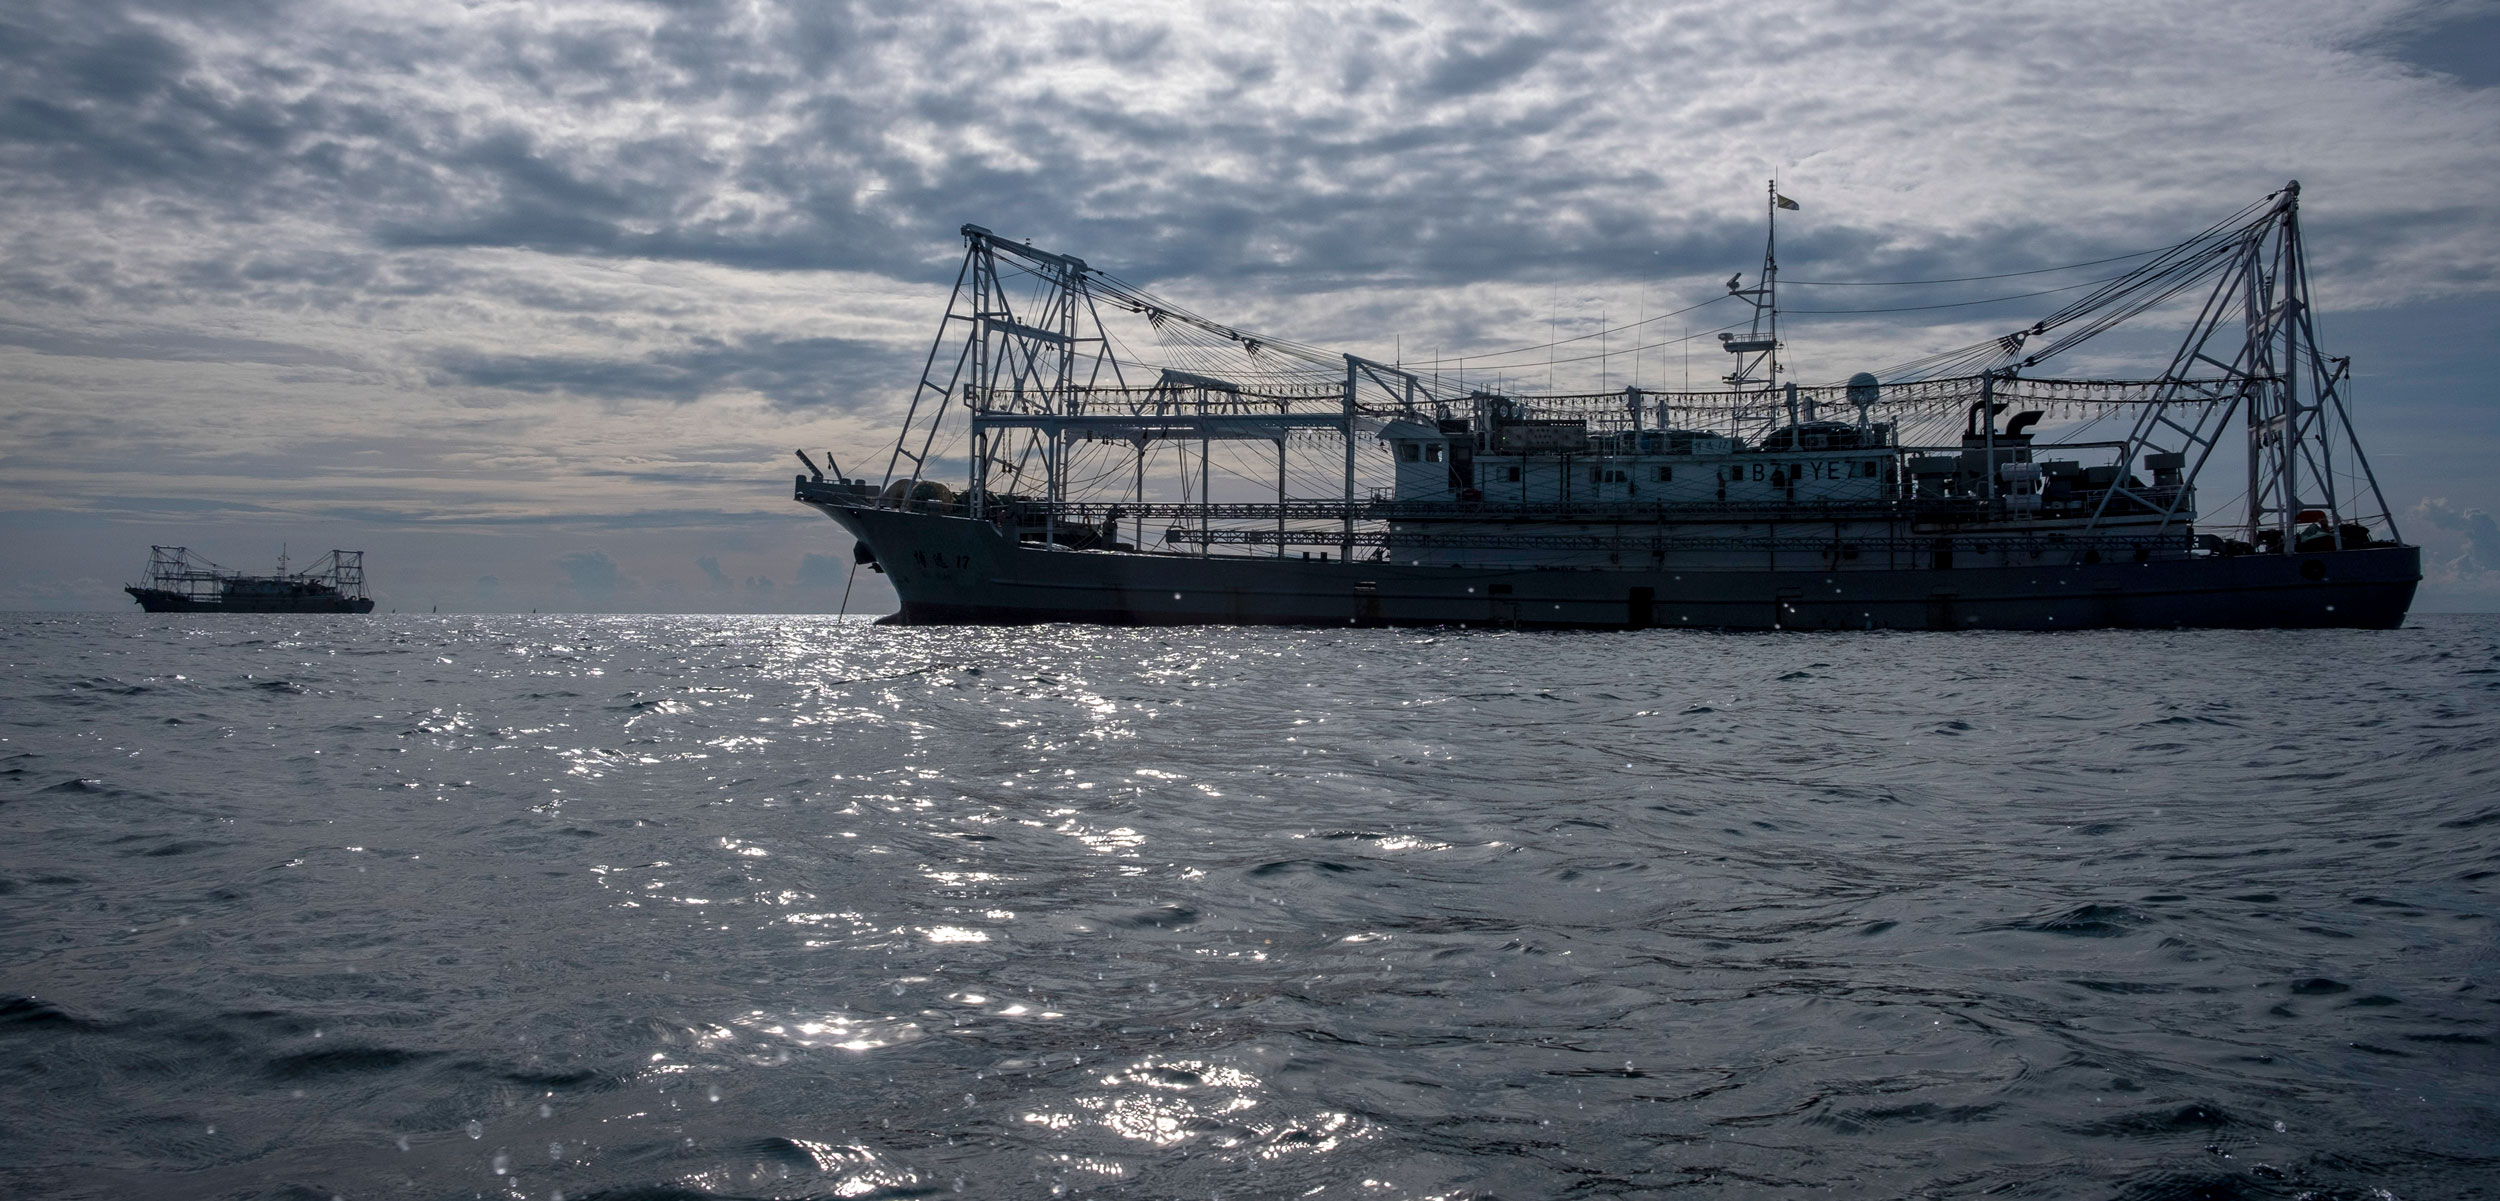 A large Chinese fishing vessel floats off the coast of Tanzania